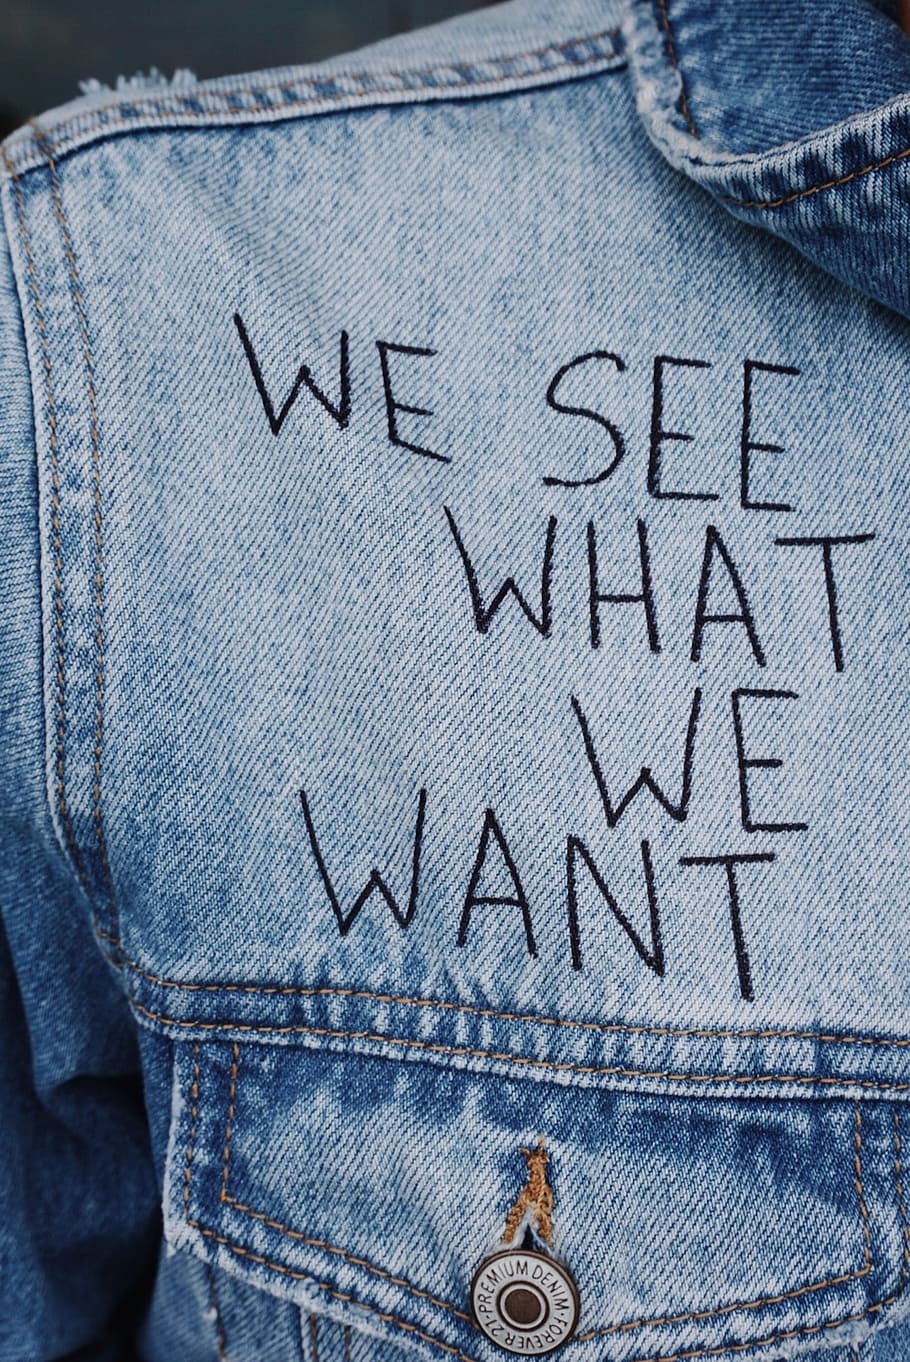 Blue Denim Collared Top With We See What We Want Text Overlay, HD wallpaper